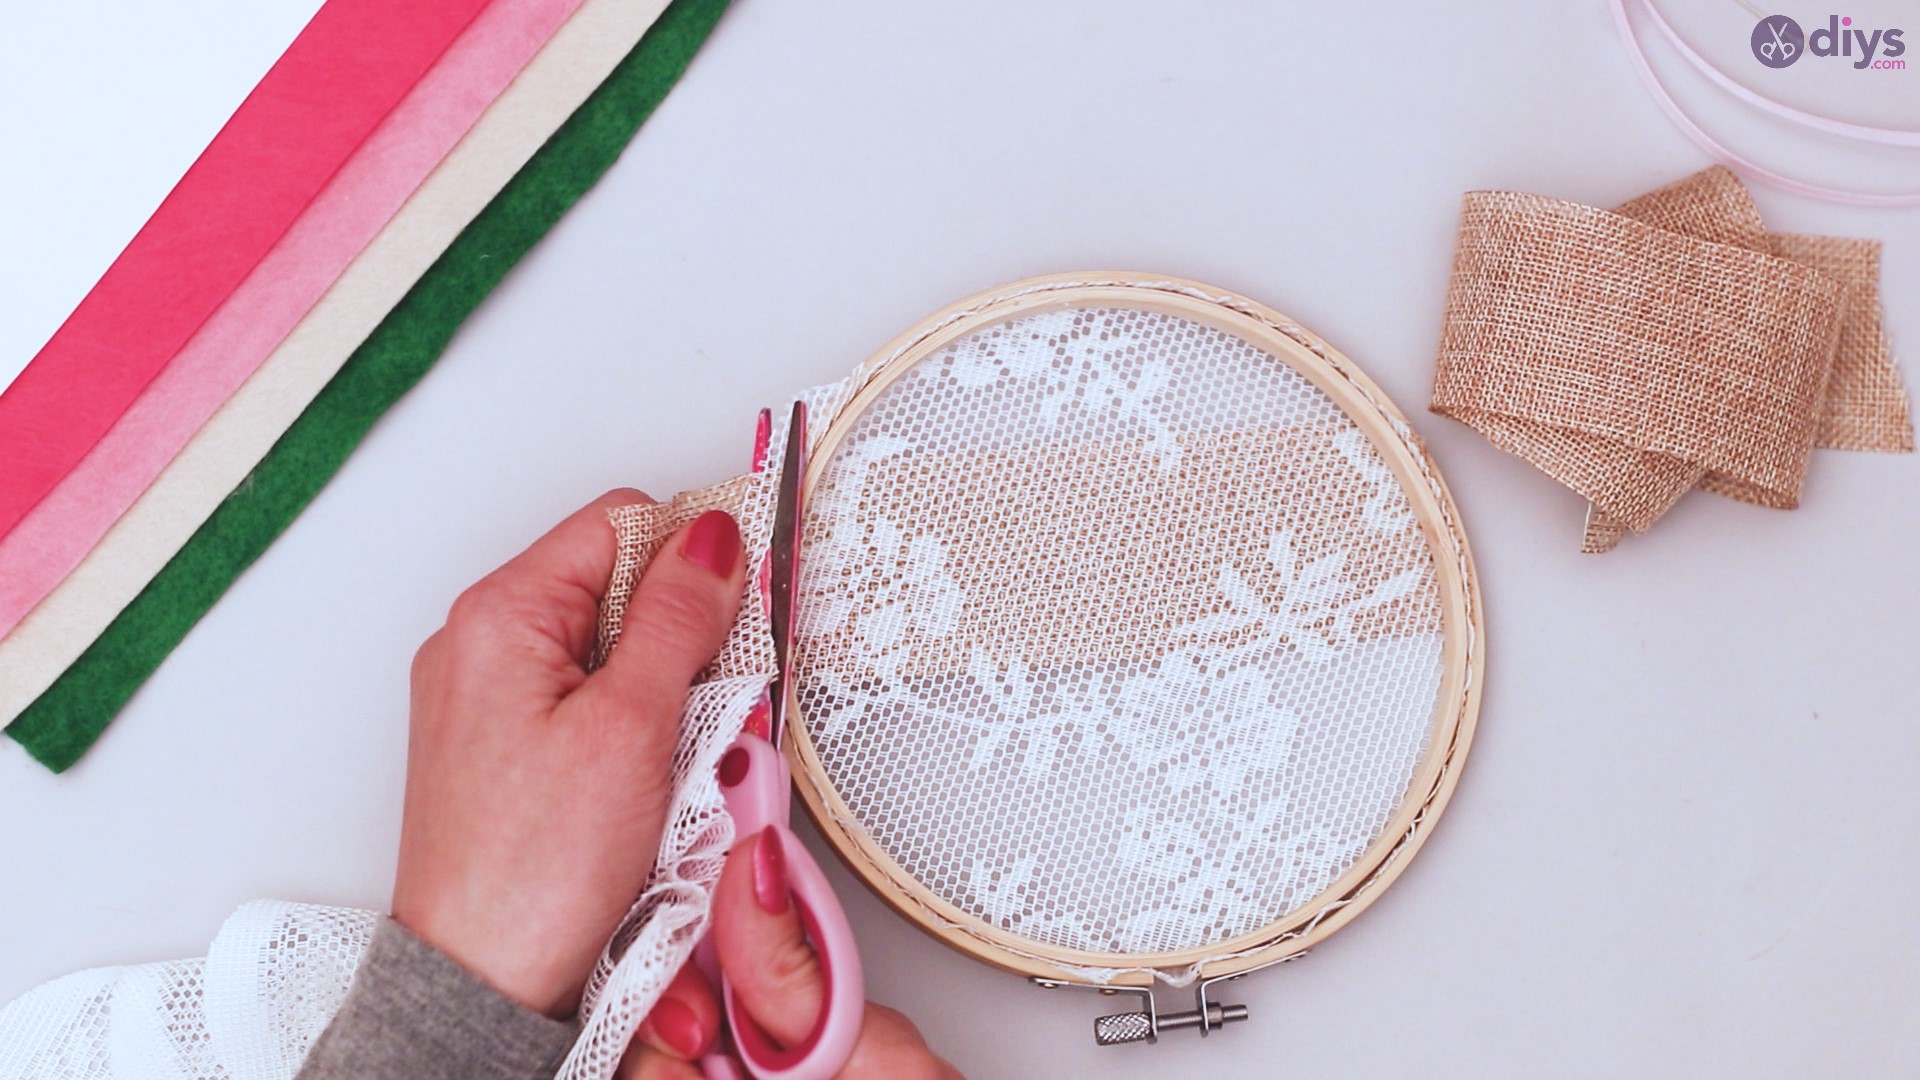 Diy embroidery hoop wall decor tutorial step by step (9)